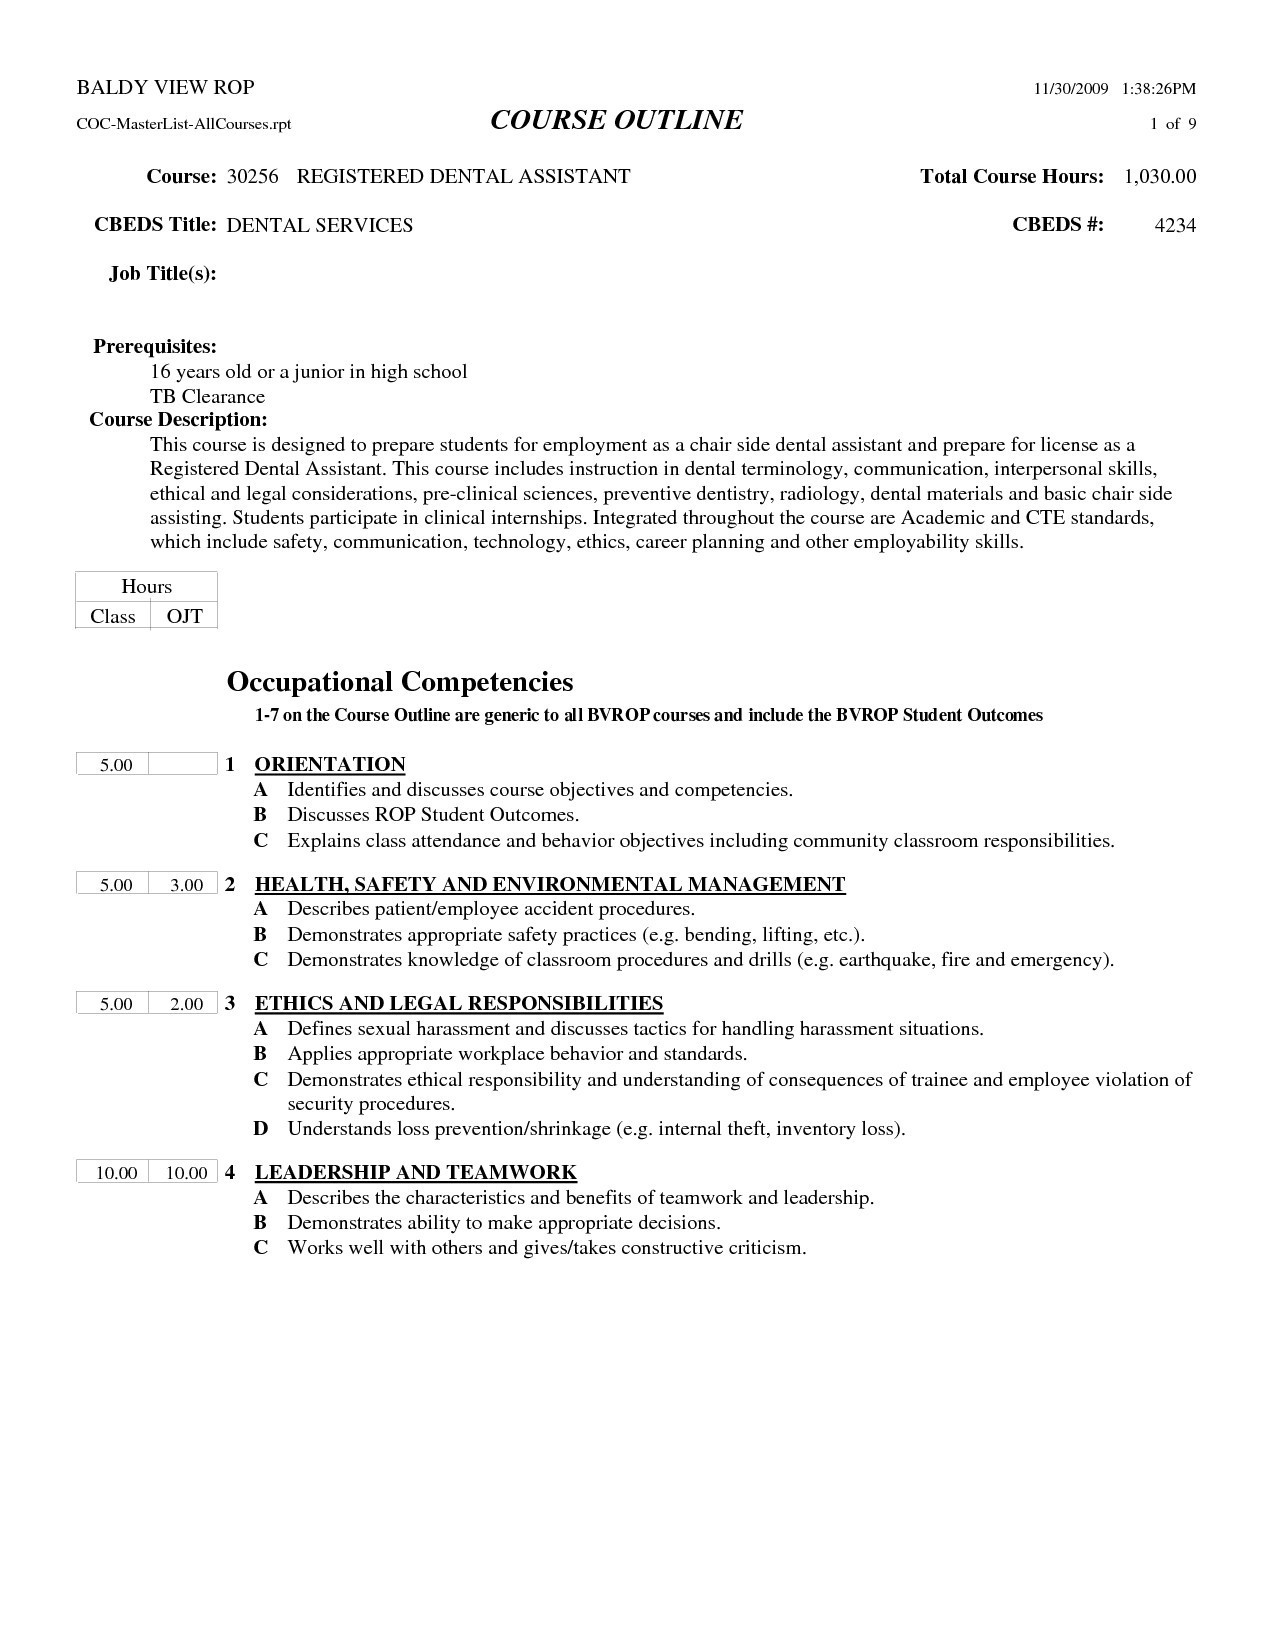 Resume Objective Example Dental Assistant Resume Objective resume objective example|wikiresume.com